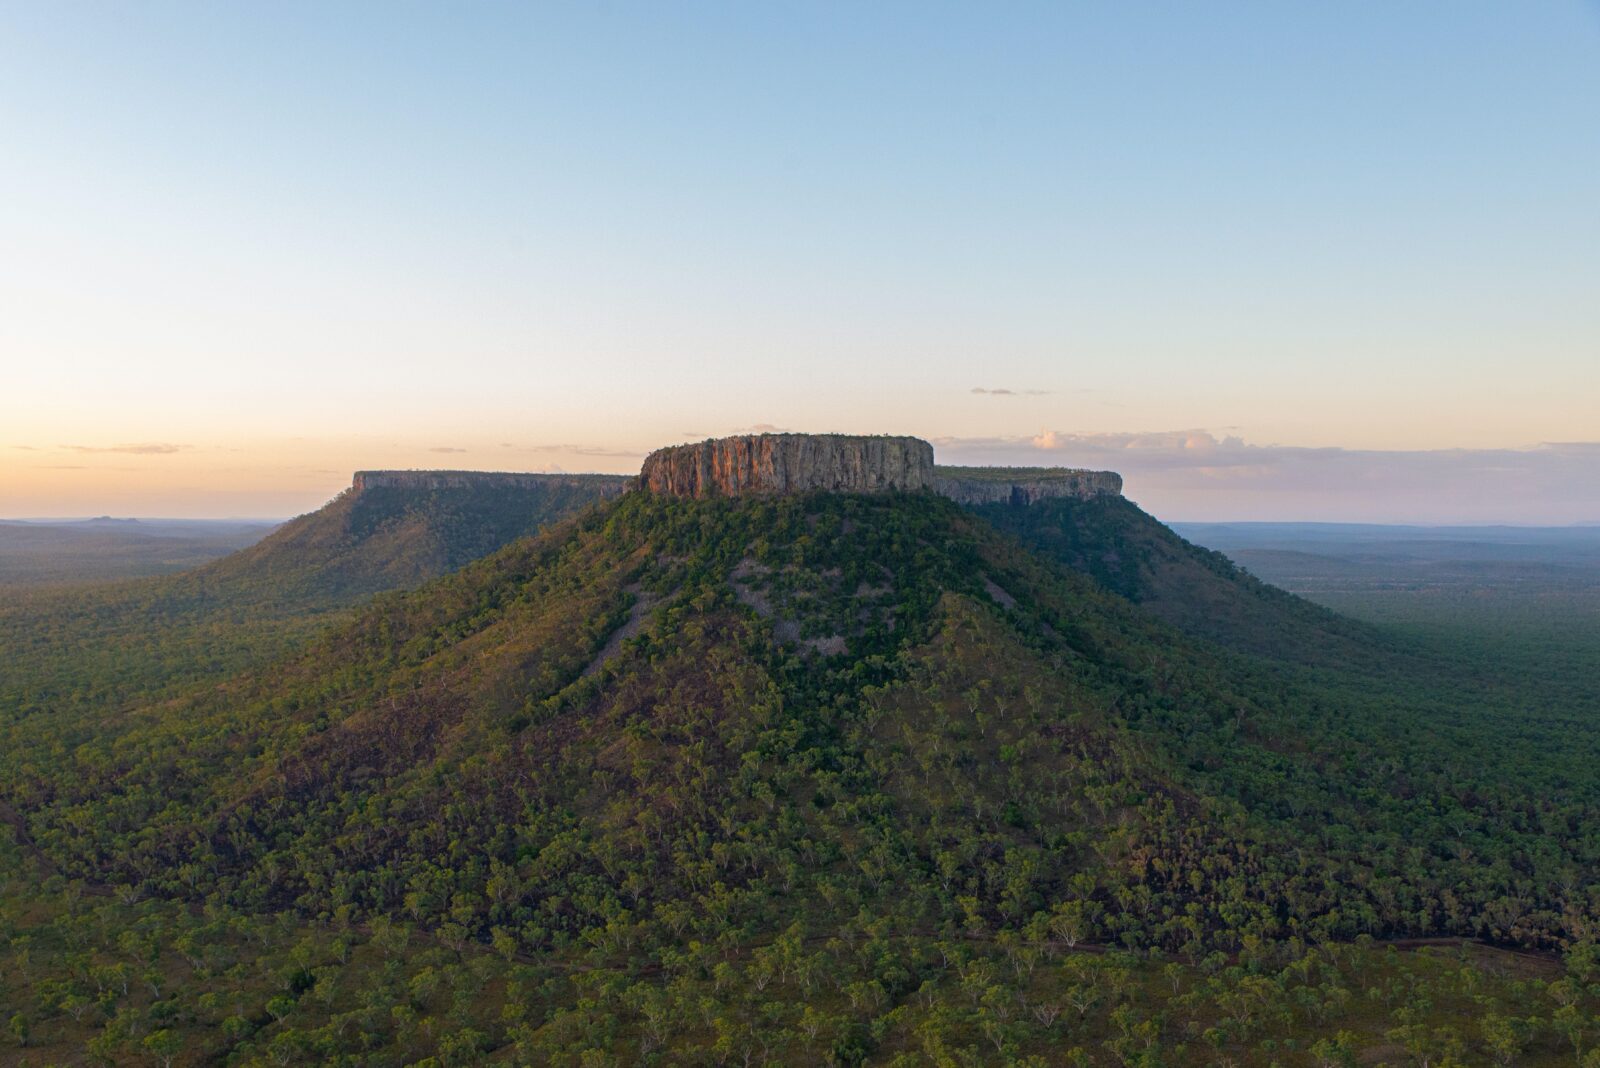 Lords Table Mountain, Peak Ranges National Park